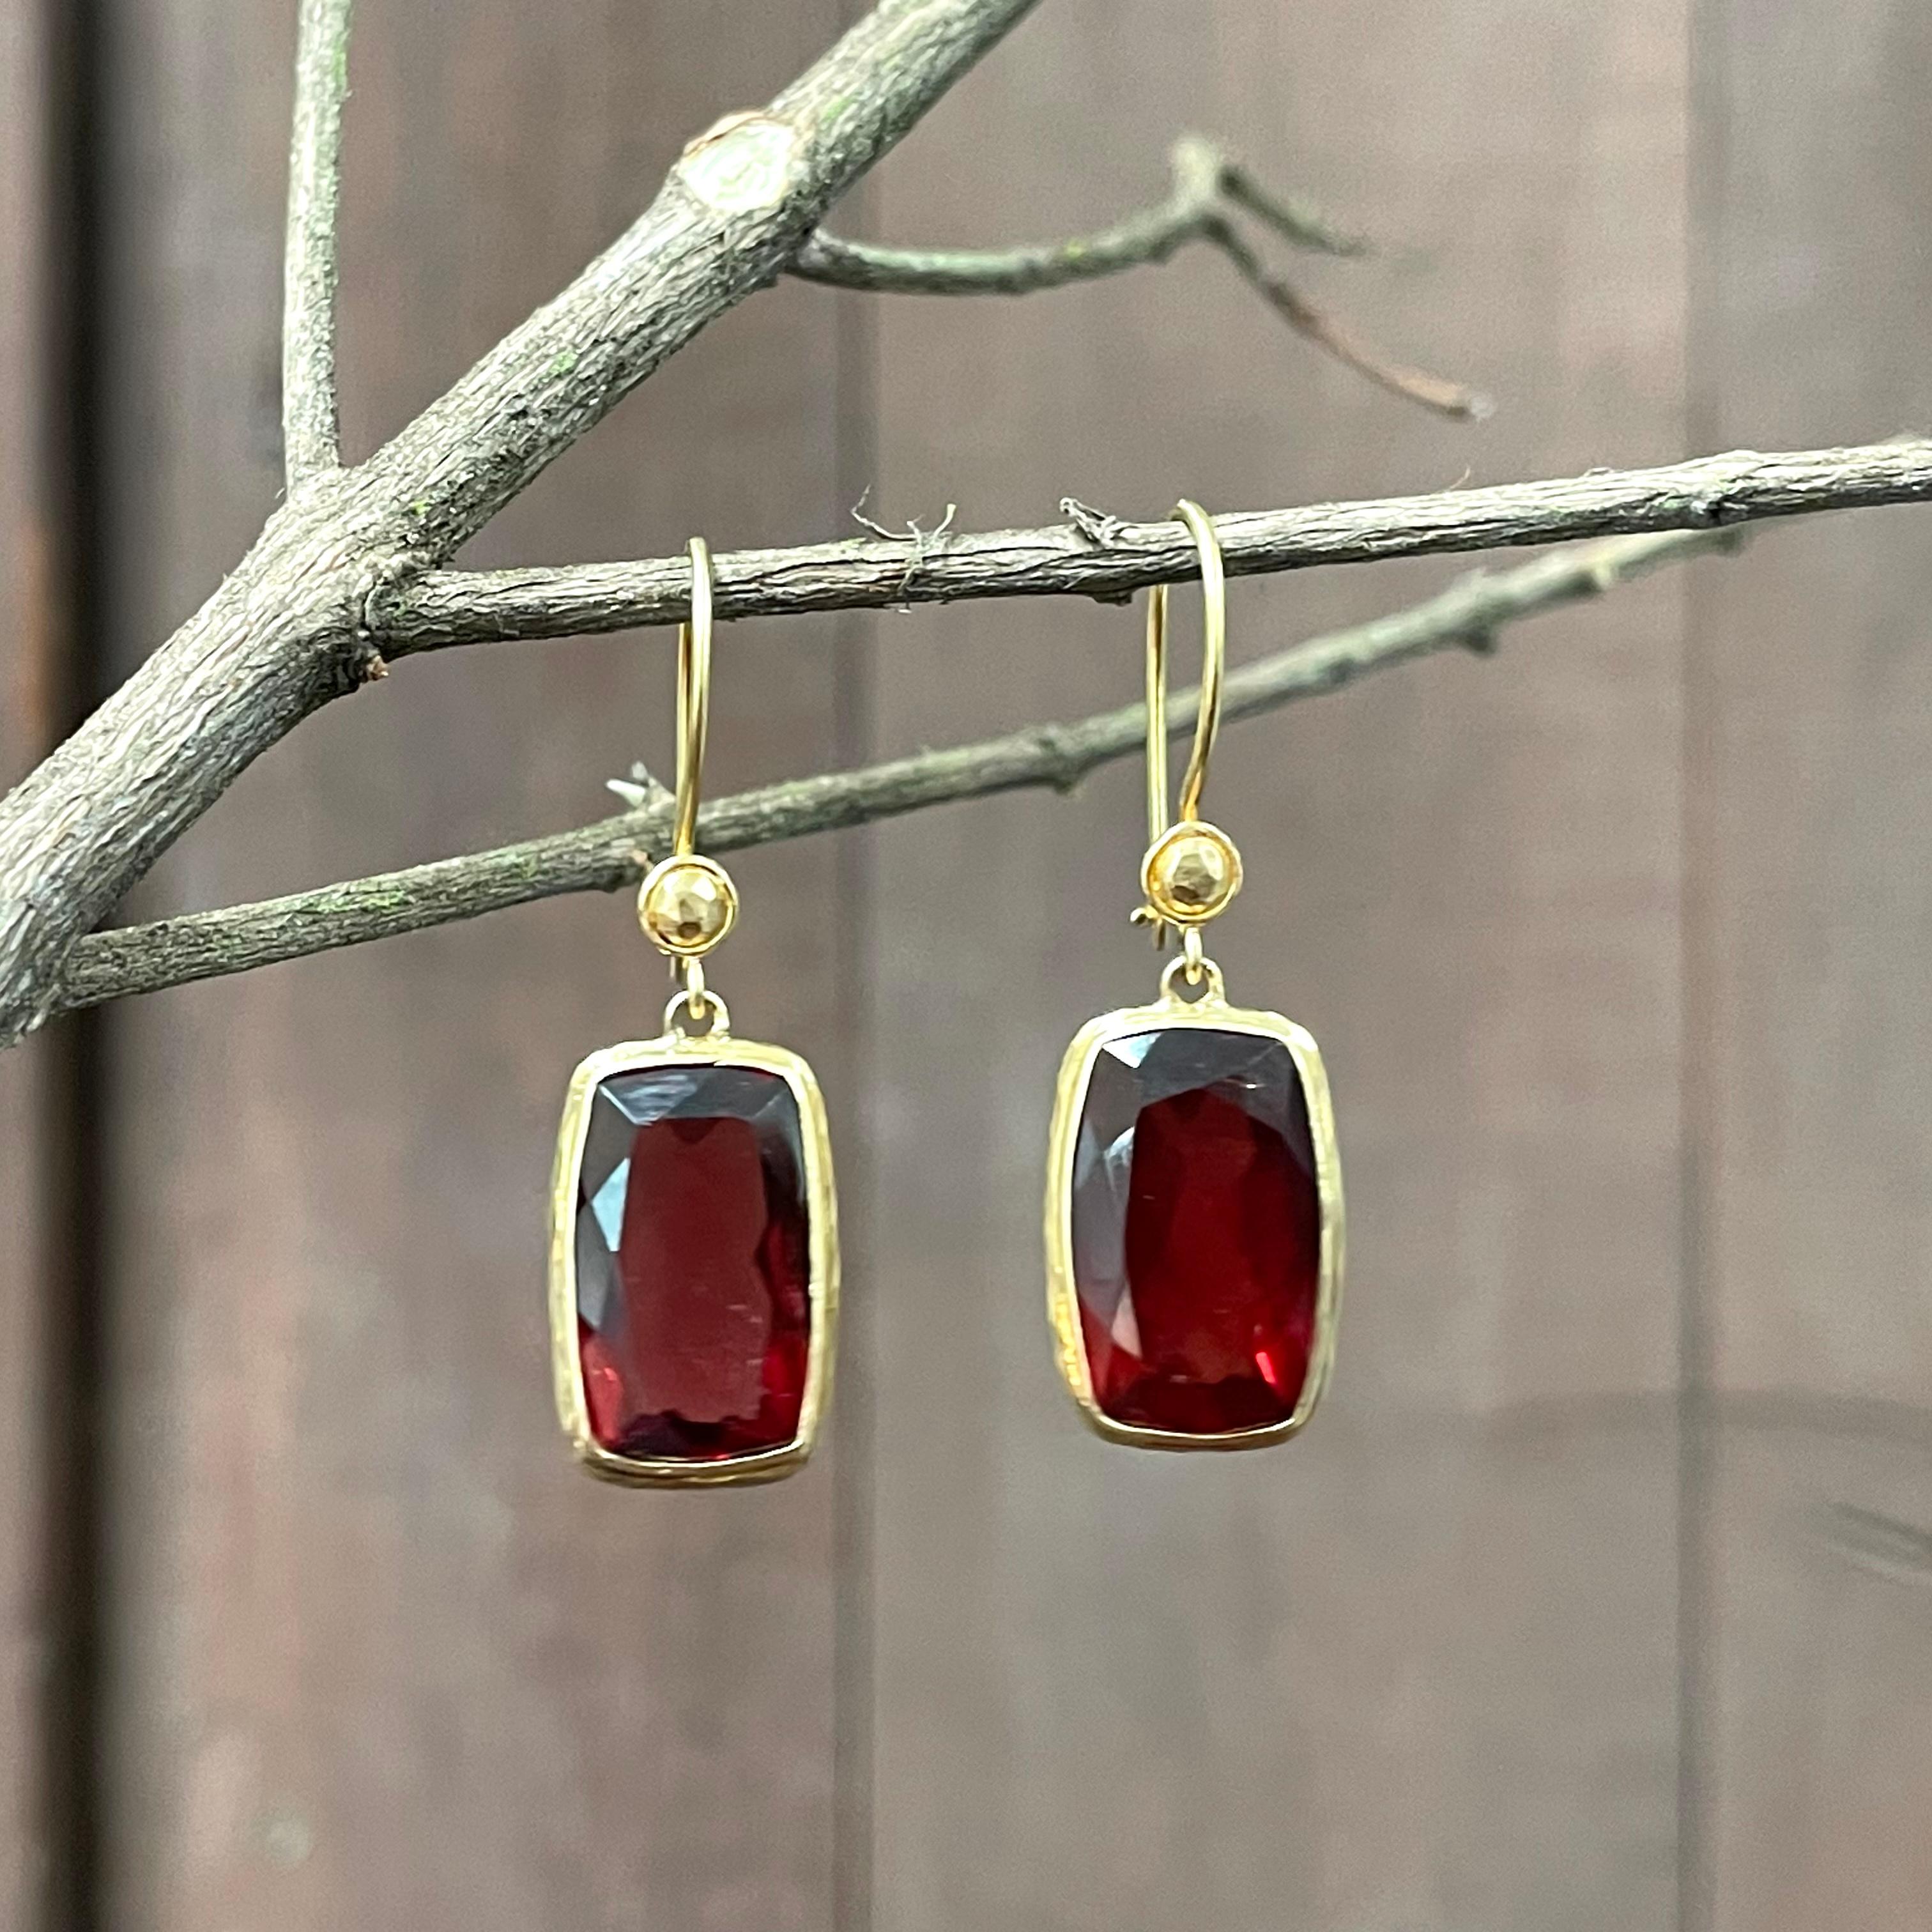 A pair of 8 x 14 mm long cushion shaped Mozambique garnets is suspended below round wire bottoms and surrounded by a slightly hammered bezels.  These are nice stones that have a lot of color and are not dark. Safety clasp wires complete. Elegant!